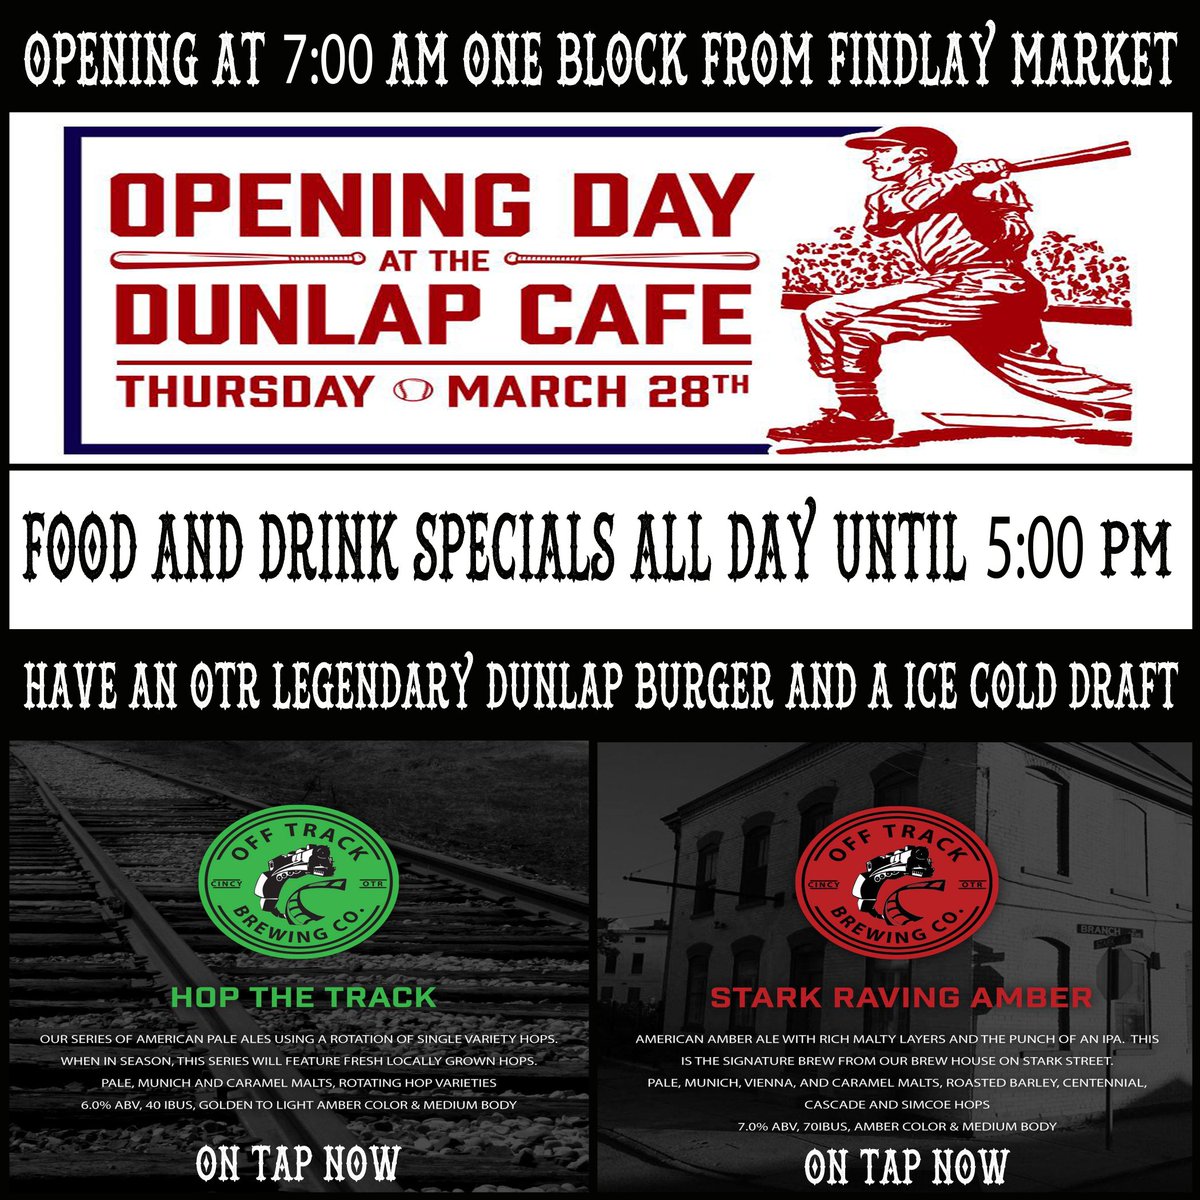 ATTENTION CINCINNATI !
Going Downtown for Opening Day? 
This is definitely a place you should check out.
Great food and 2 featured Off Track Brews 
Handcrafted in The Historical OTR Brewery District.  
#cincinnatibaseball #handcrafted #offtrackbrewingcompany